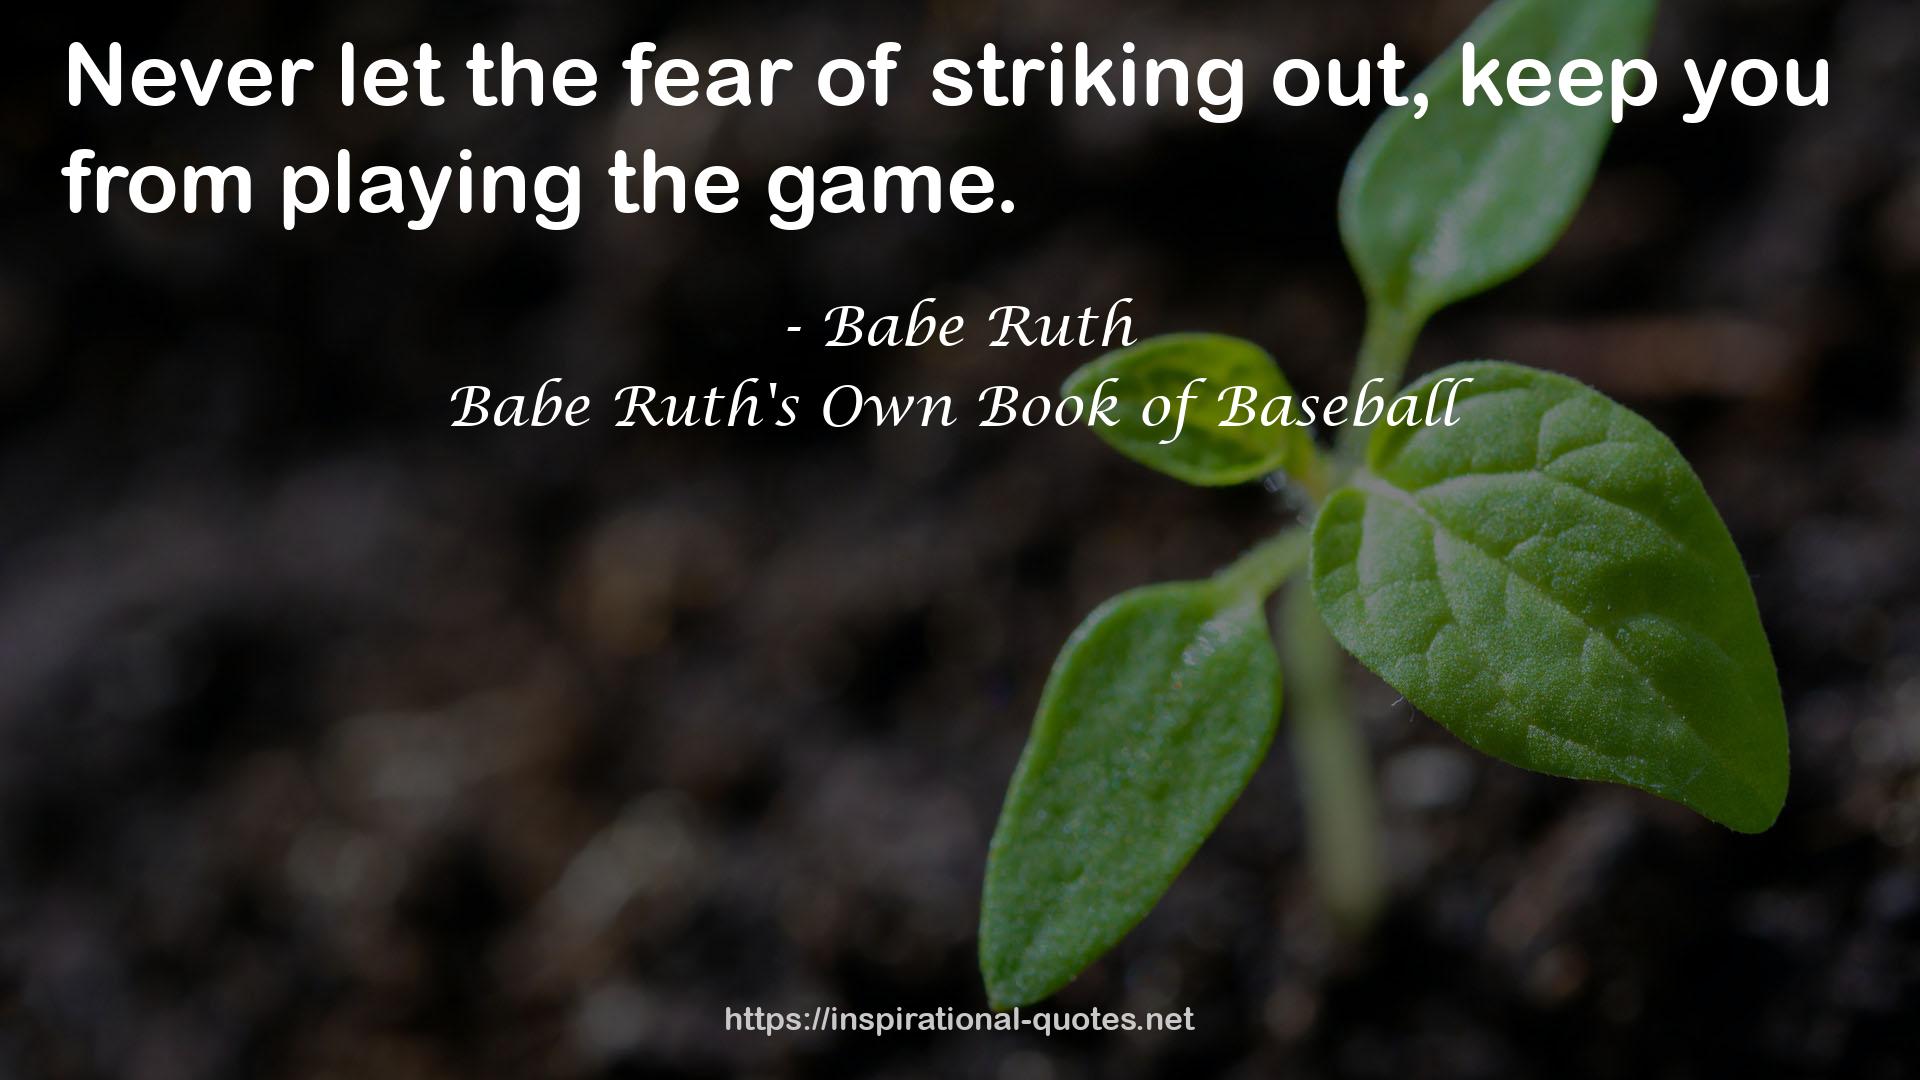 Babe Ruth's Own Book of Baseball QUOTES